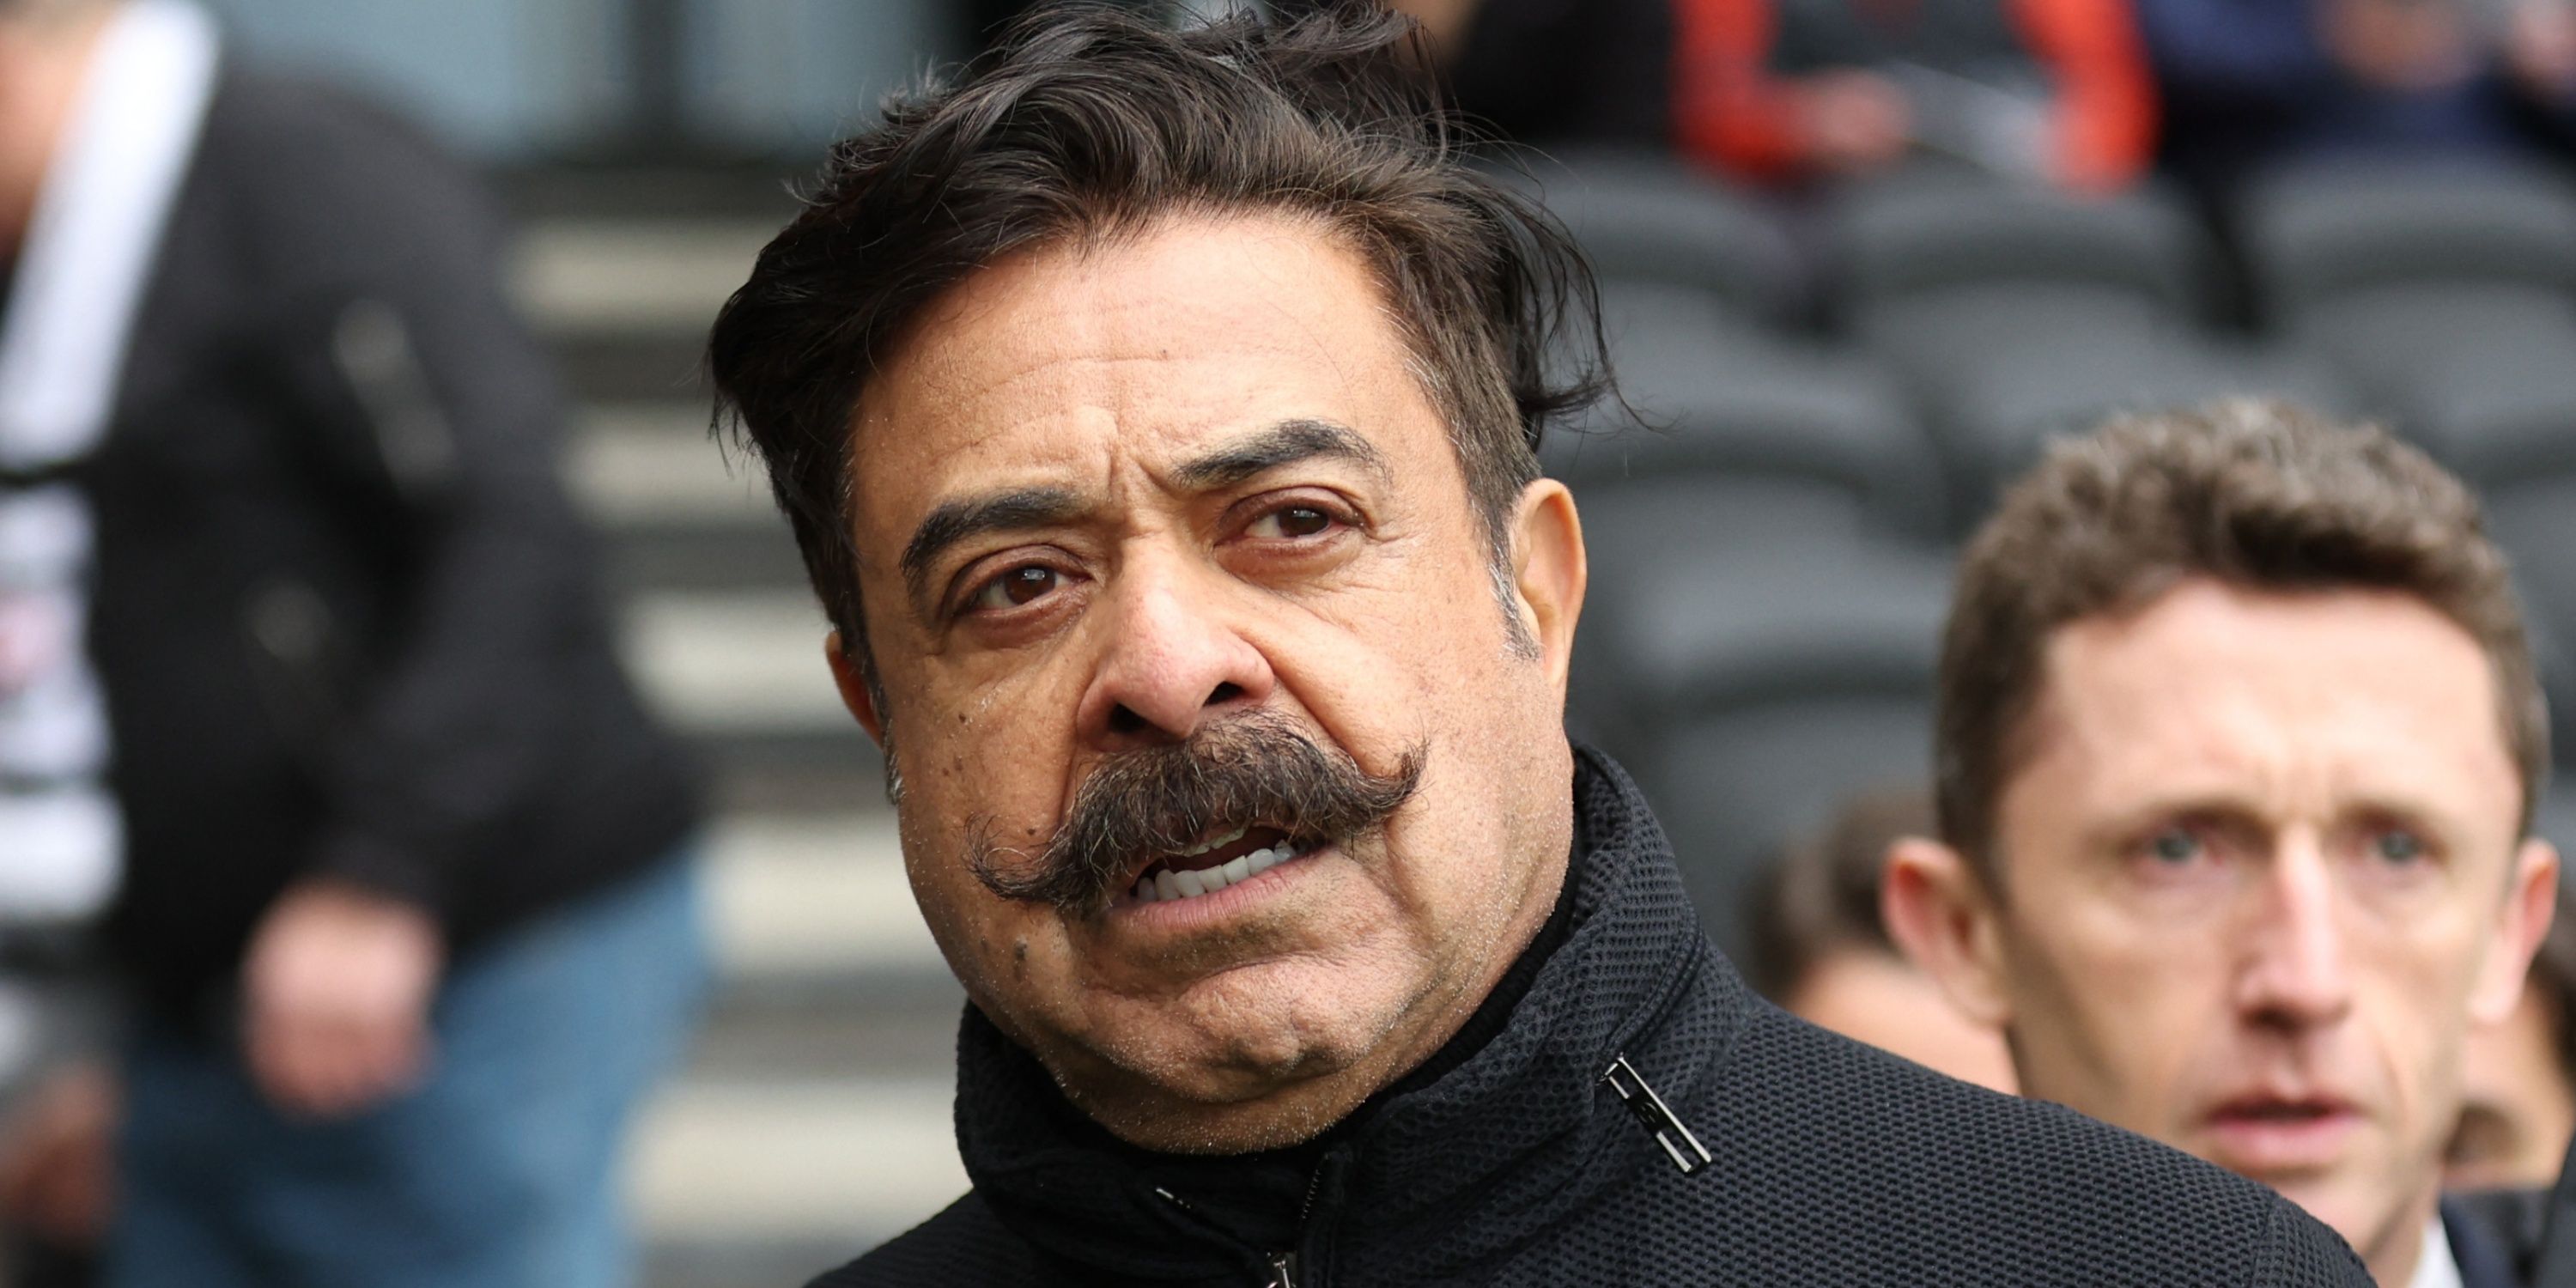 Fulham owner Shahid Khan is pictured inside their stadium